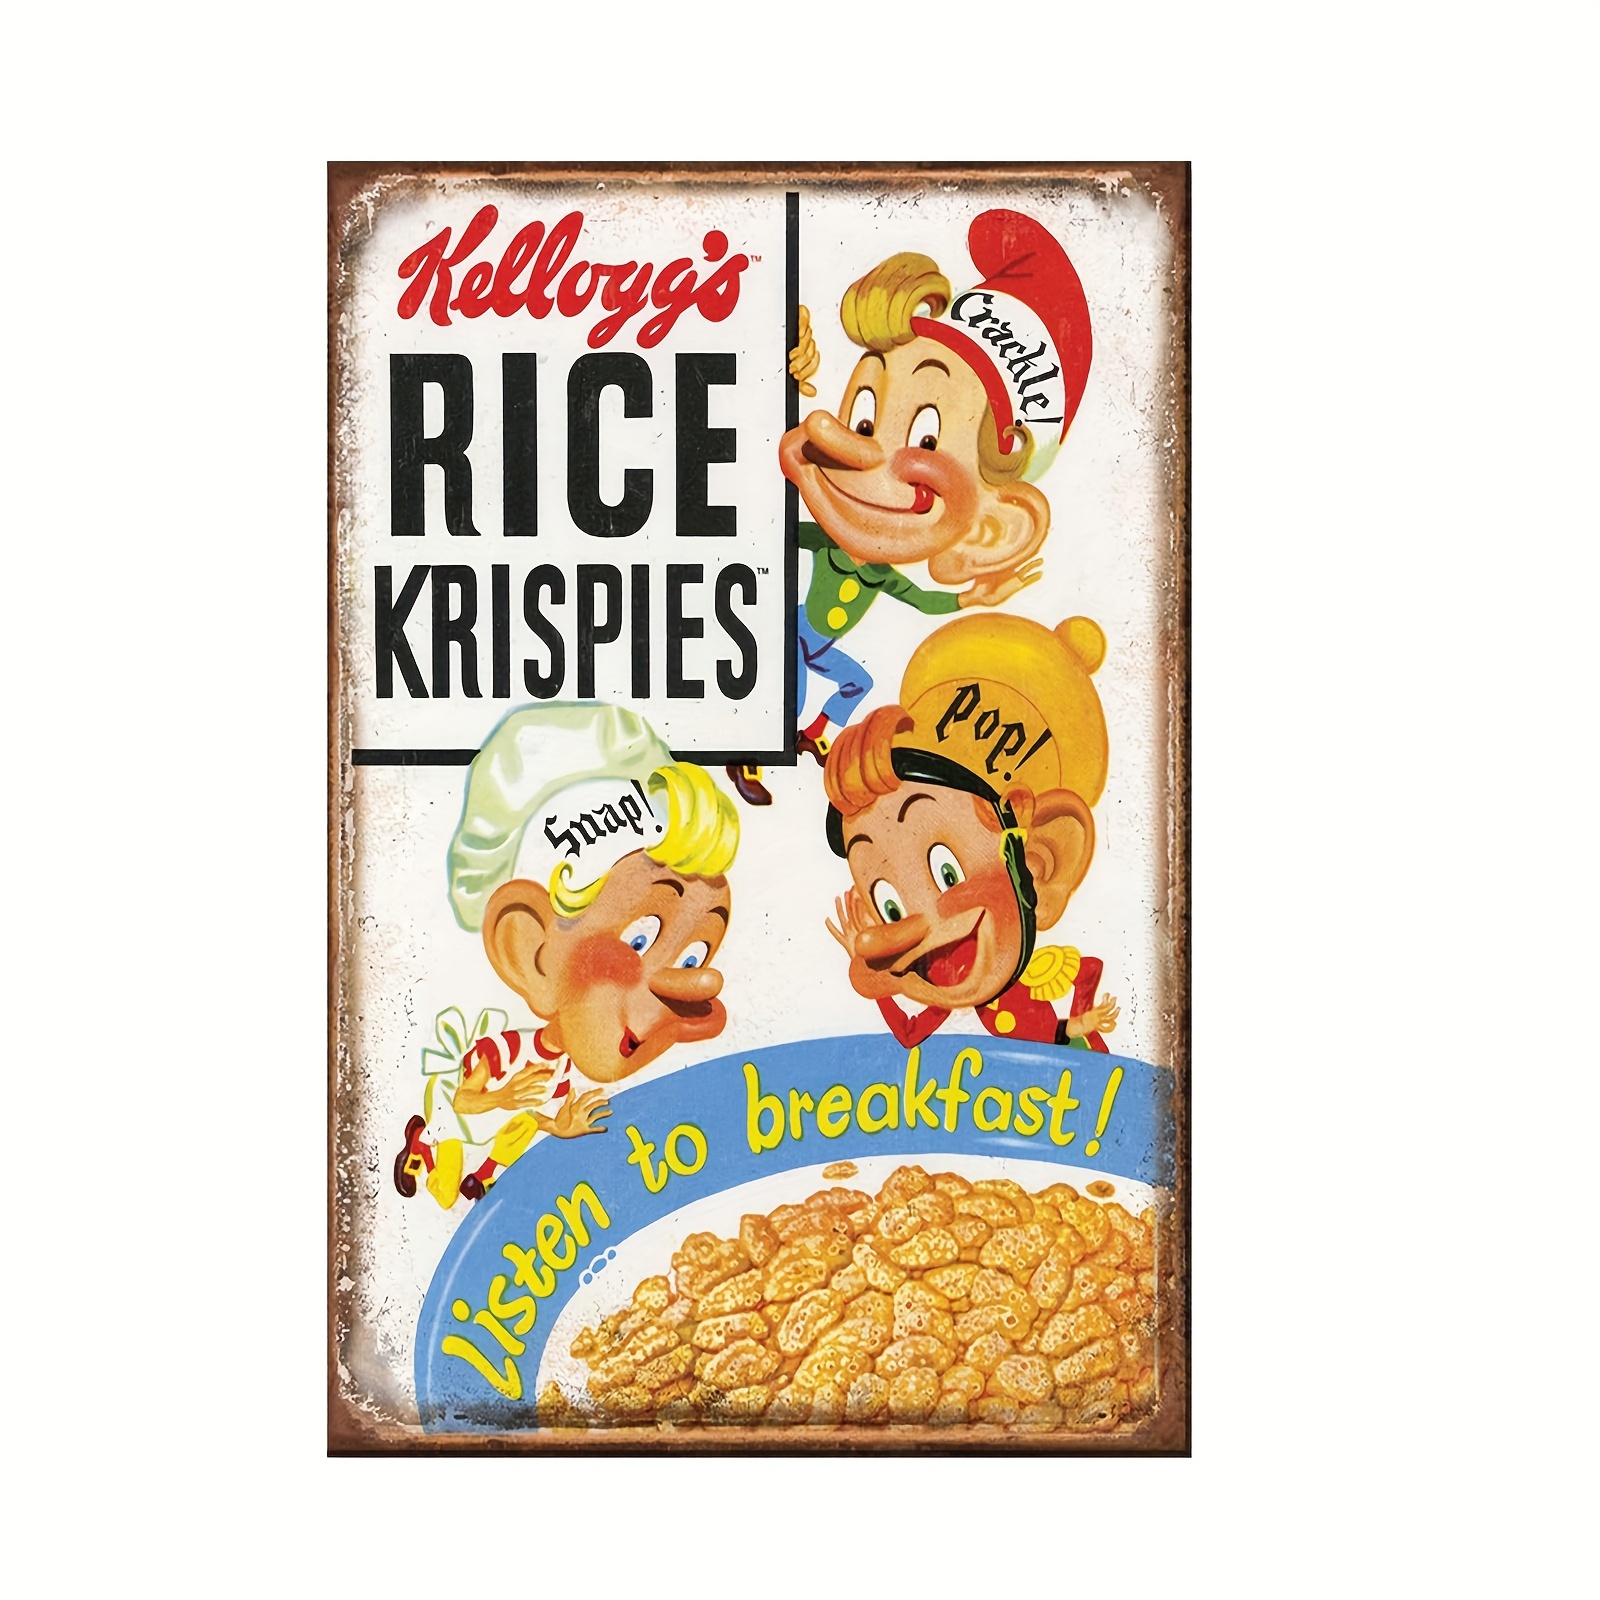 

Rice Krispies Vintage Metal Sign - Retro Iron Wall Decor, Uv Protected & Fade Resistant, Pre-drilled, Hd Print 8x12